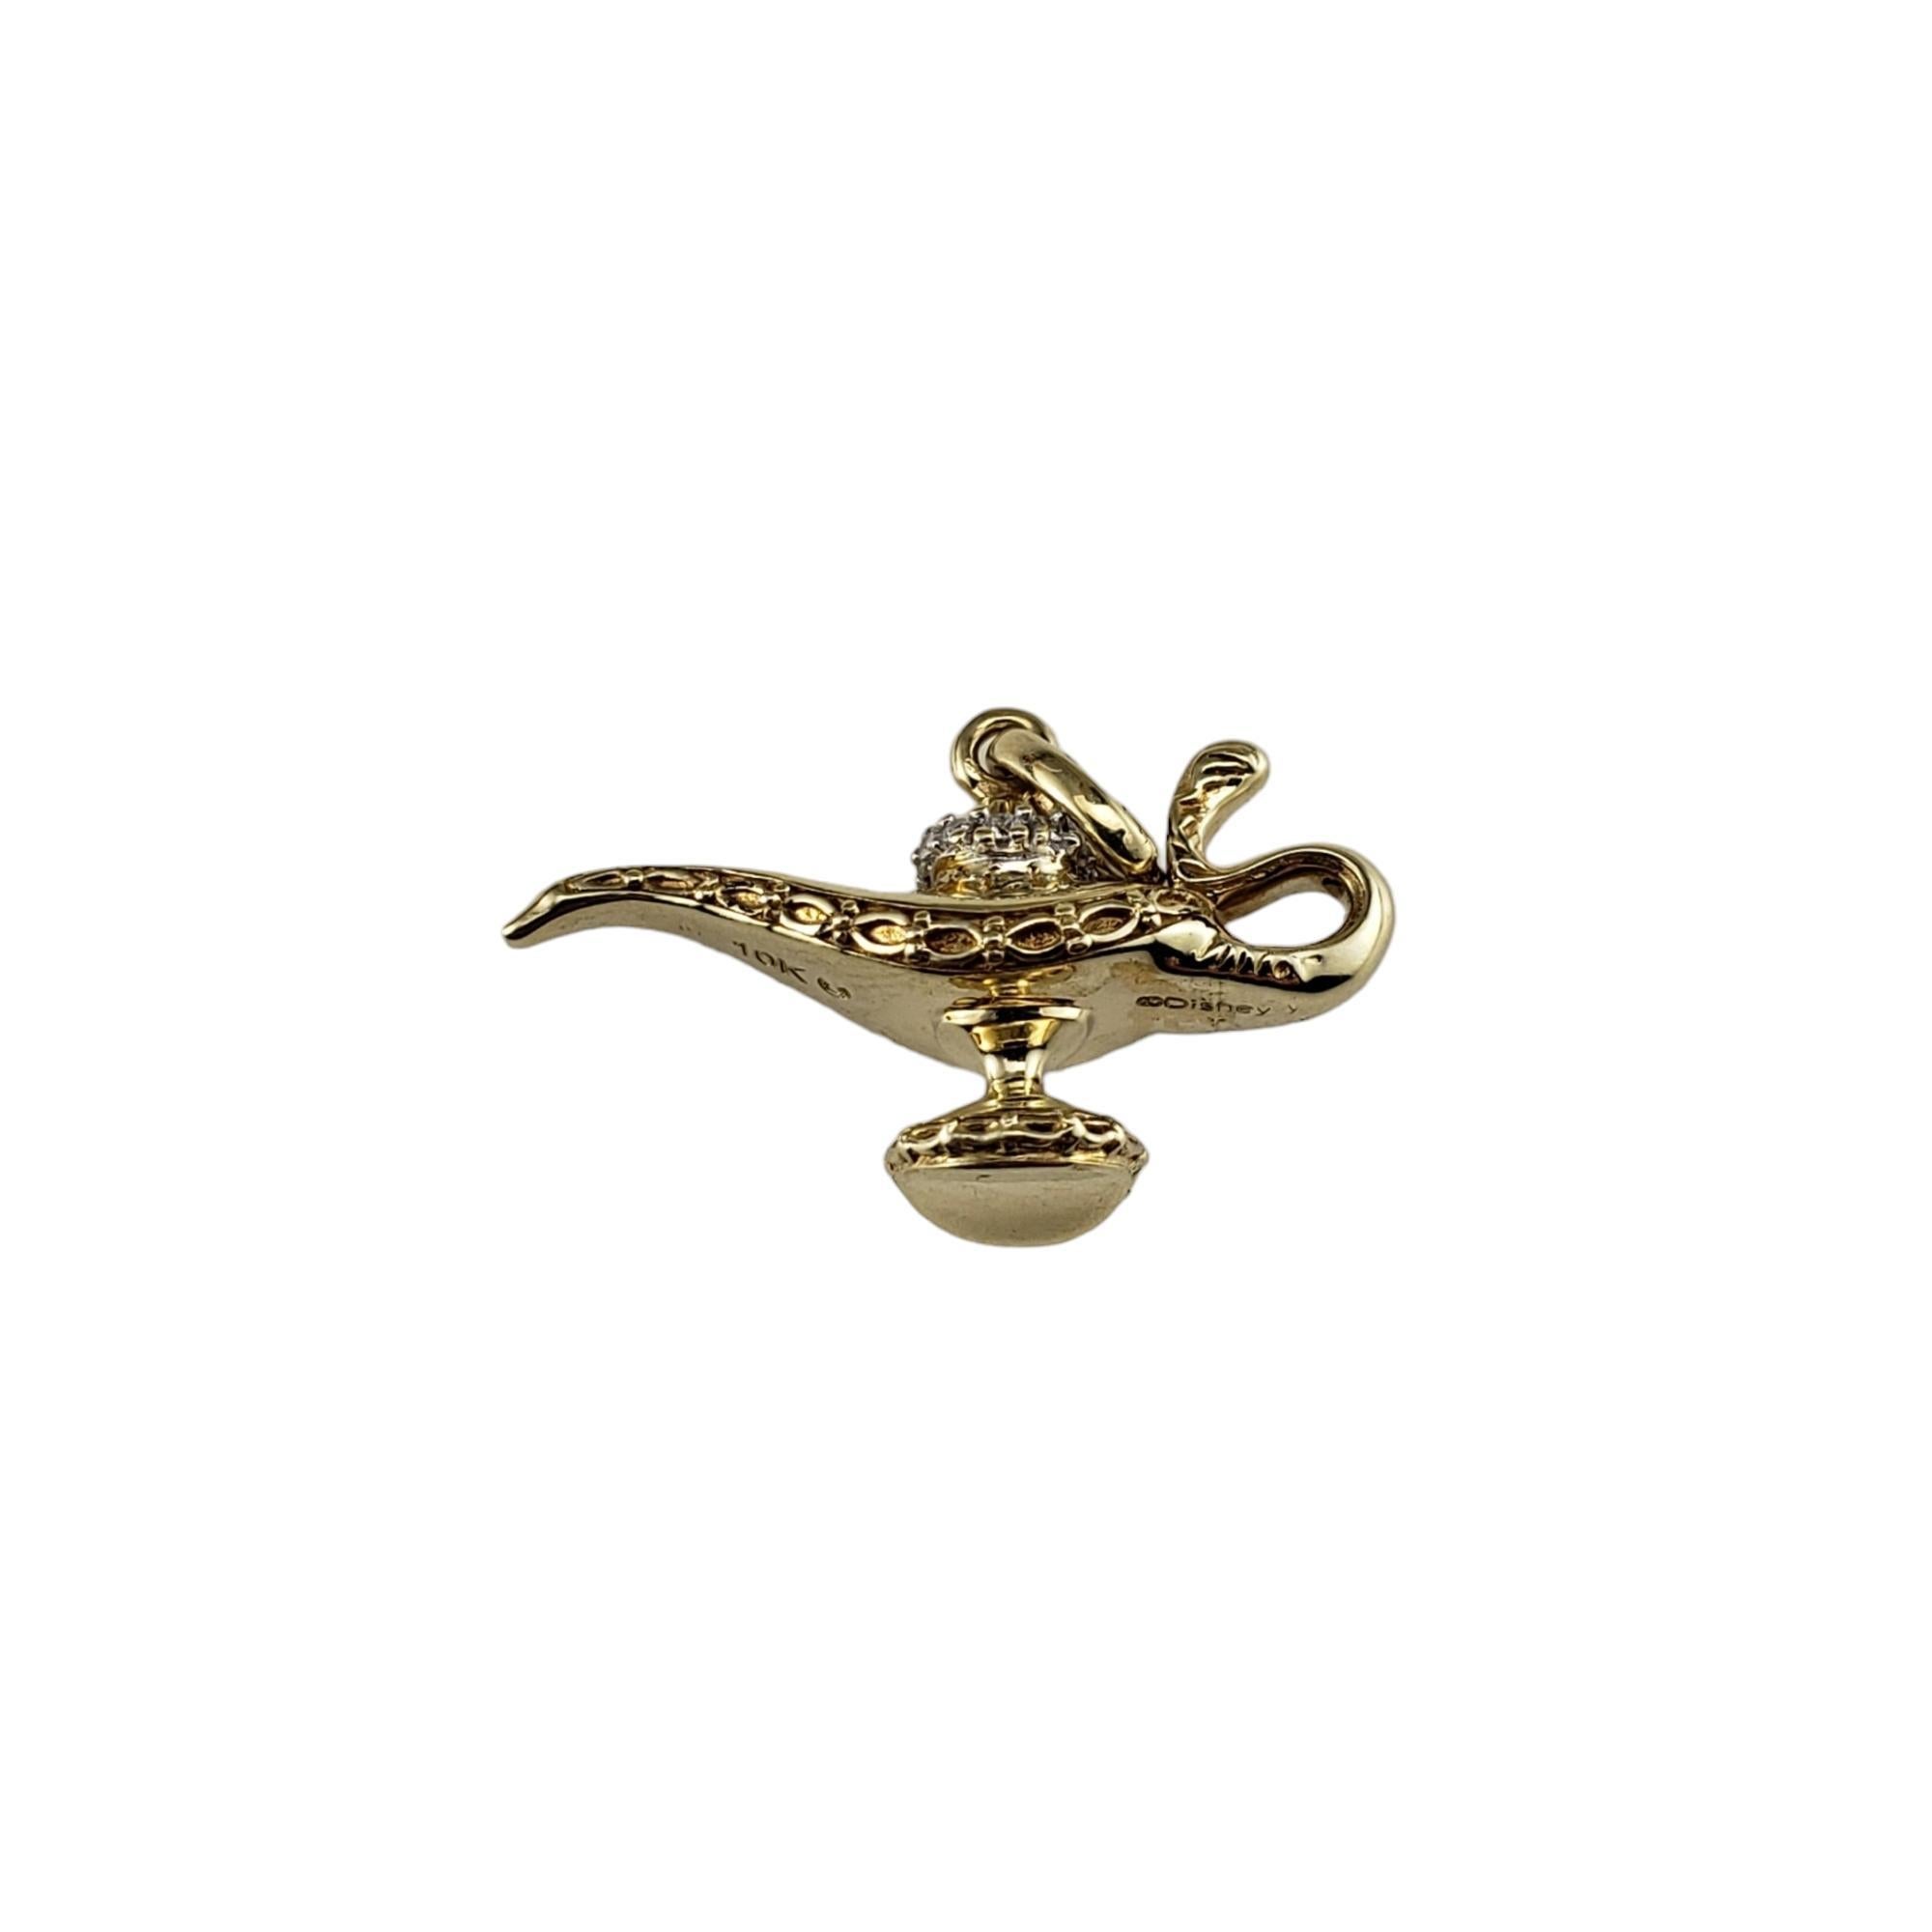 Disney 10K Yellow Gold and Diamond Aladdin Charm-

Capture that Disney magic!

This lovely Aladdin's lamp charm features 14 round brilliant cut diamonds set in beautifully detailed 10K yellow gold.

Approximate total diamond weight: .05 ct.

Diamond